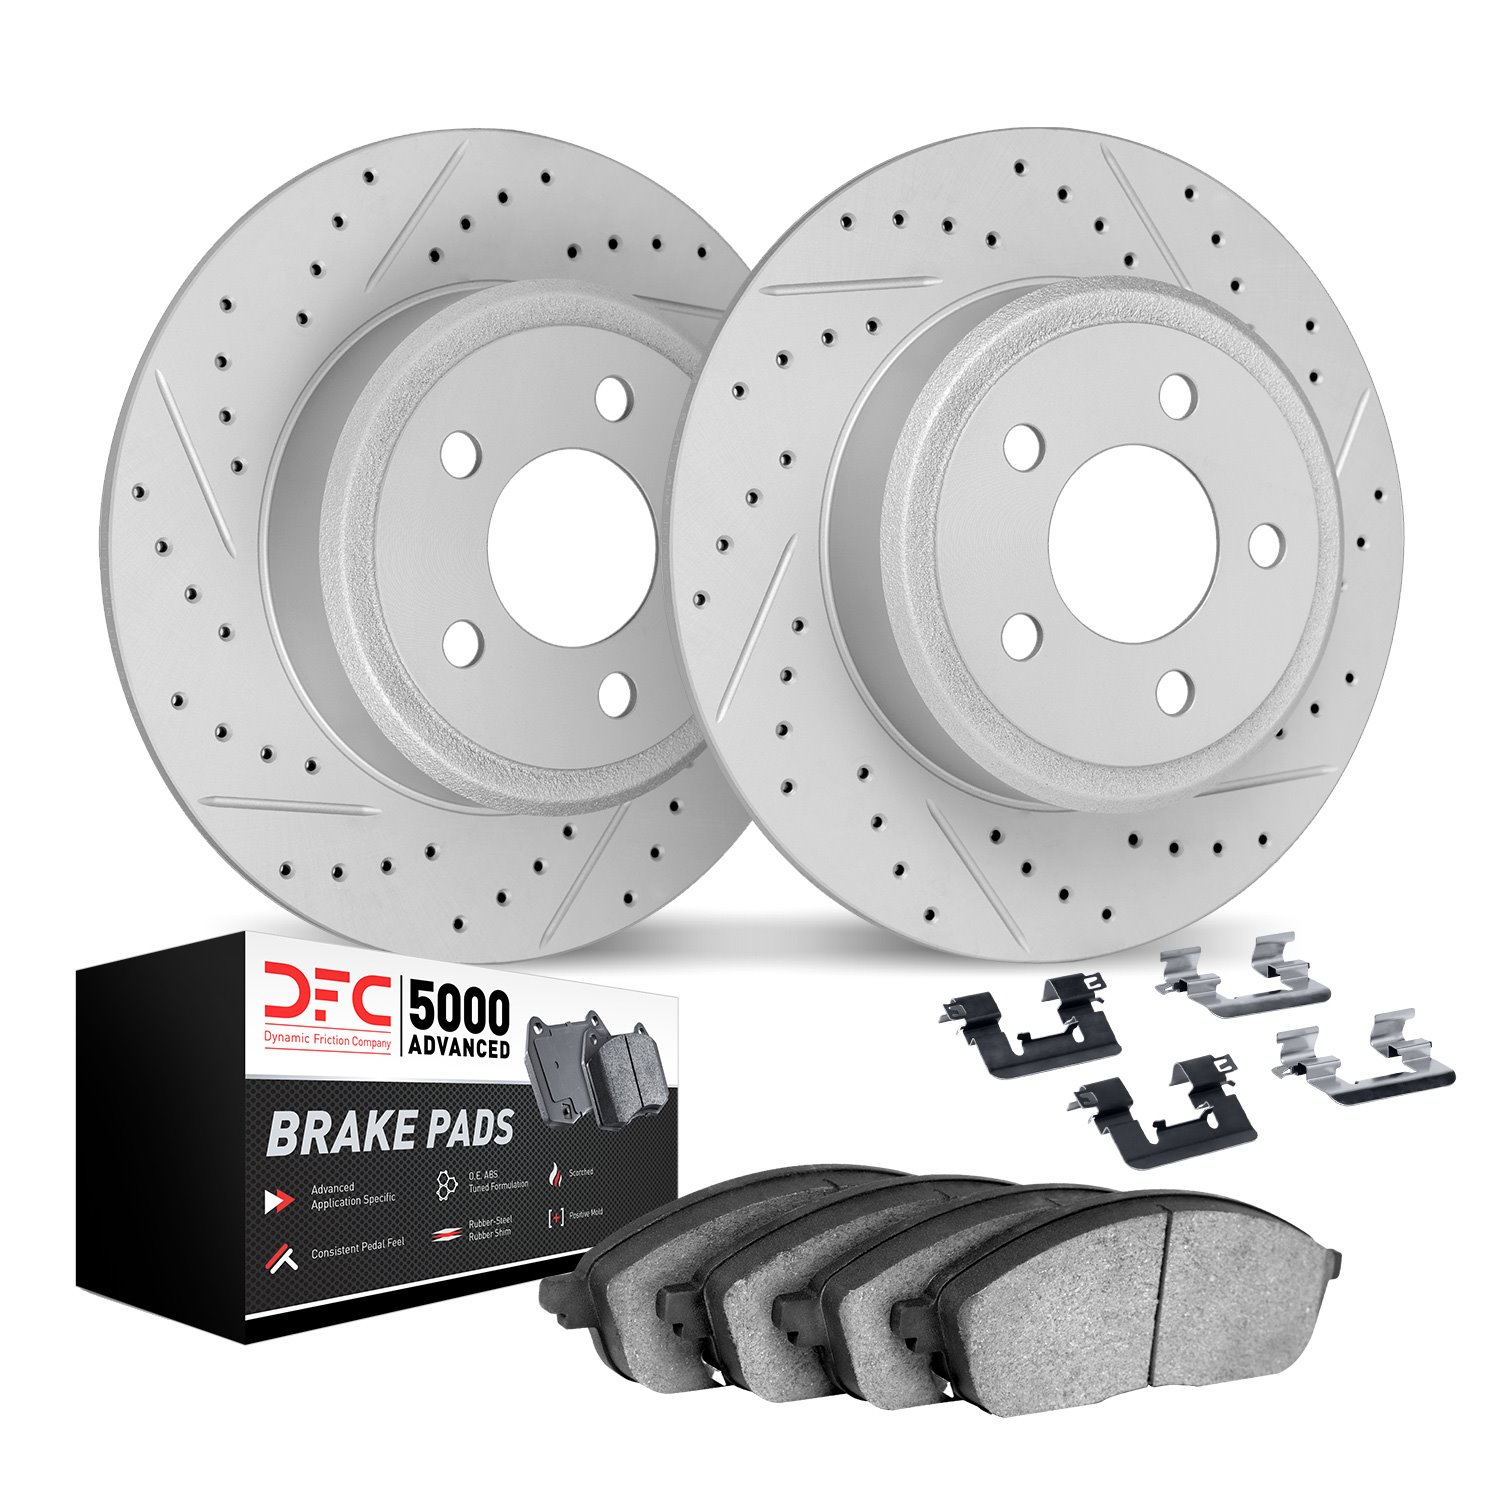 2512-63032 Geoperformance Drilled/Slotted Rotors w/5000 Advanced Brake Pads Kit & Hardware, 2012-2016 Mercedes-Benz, Position: R